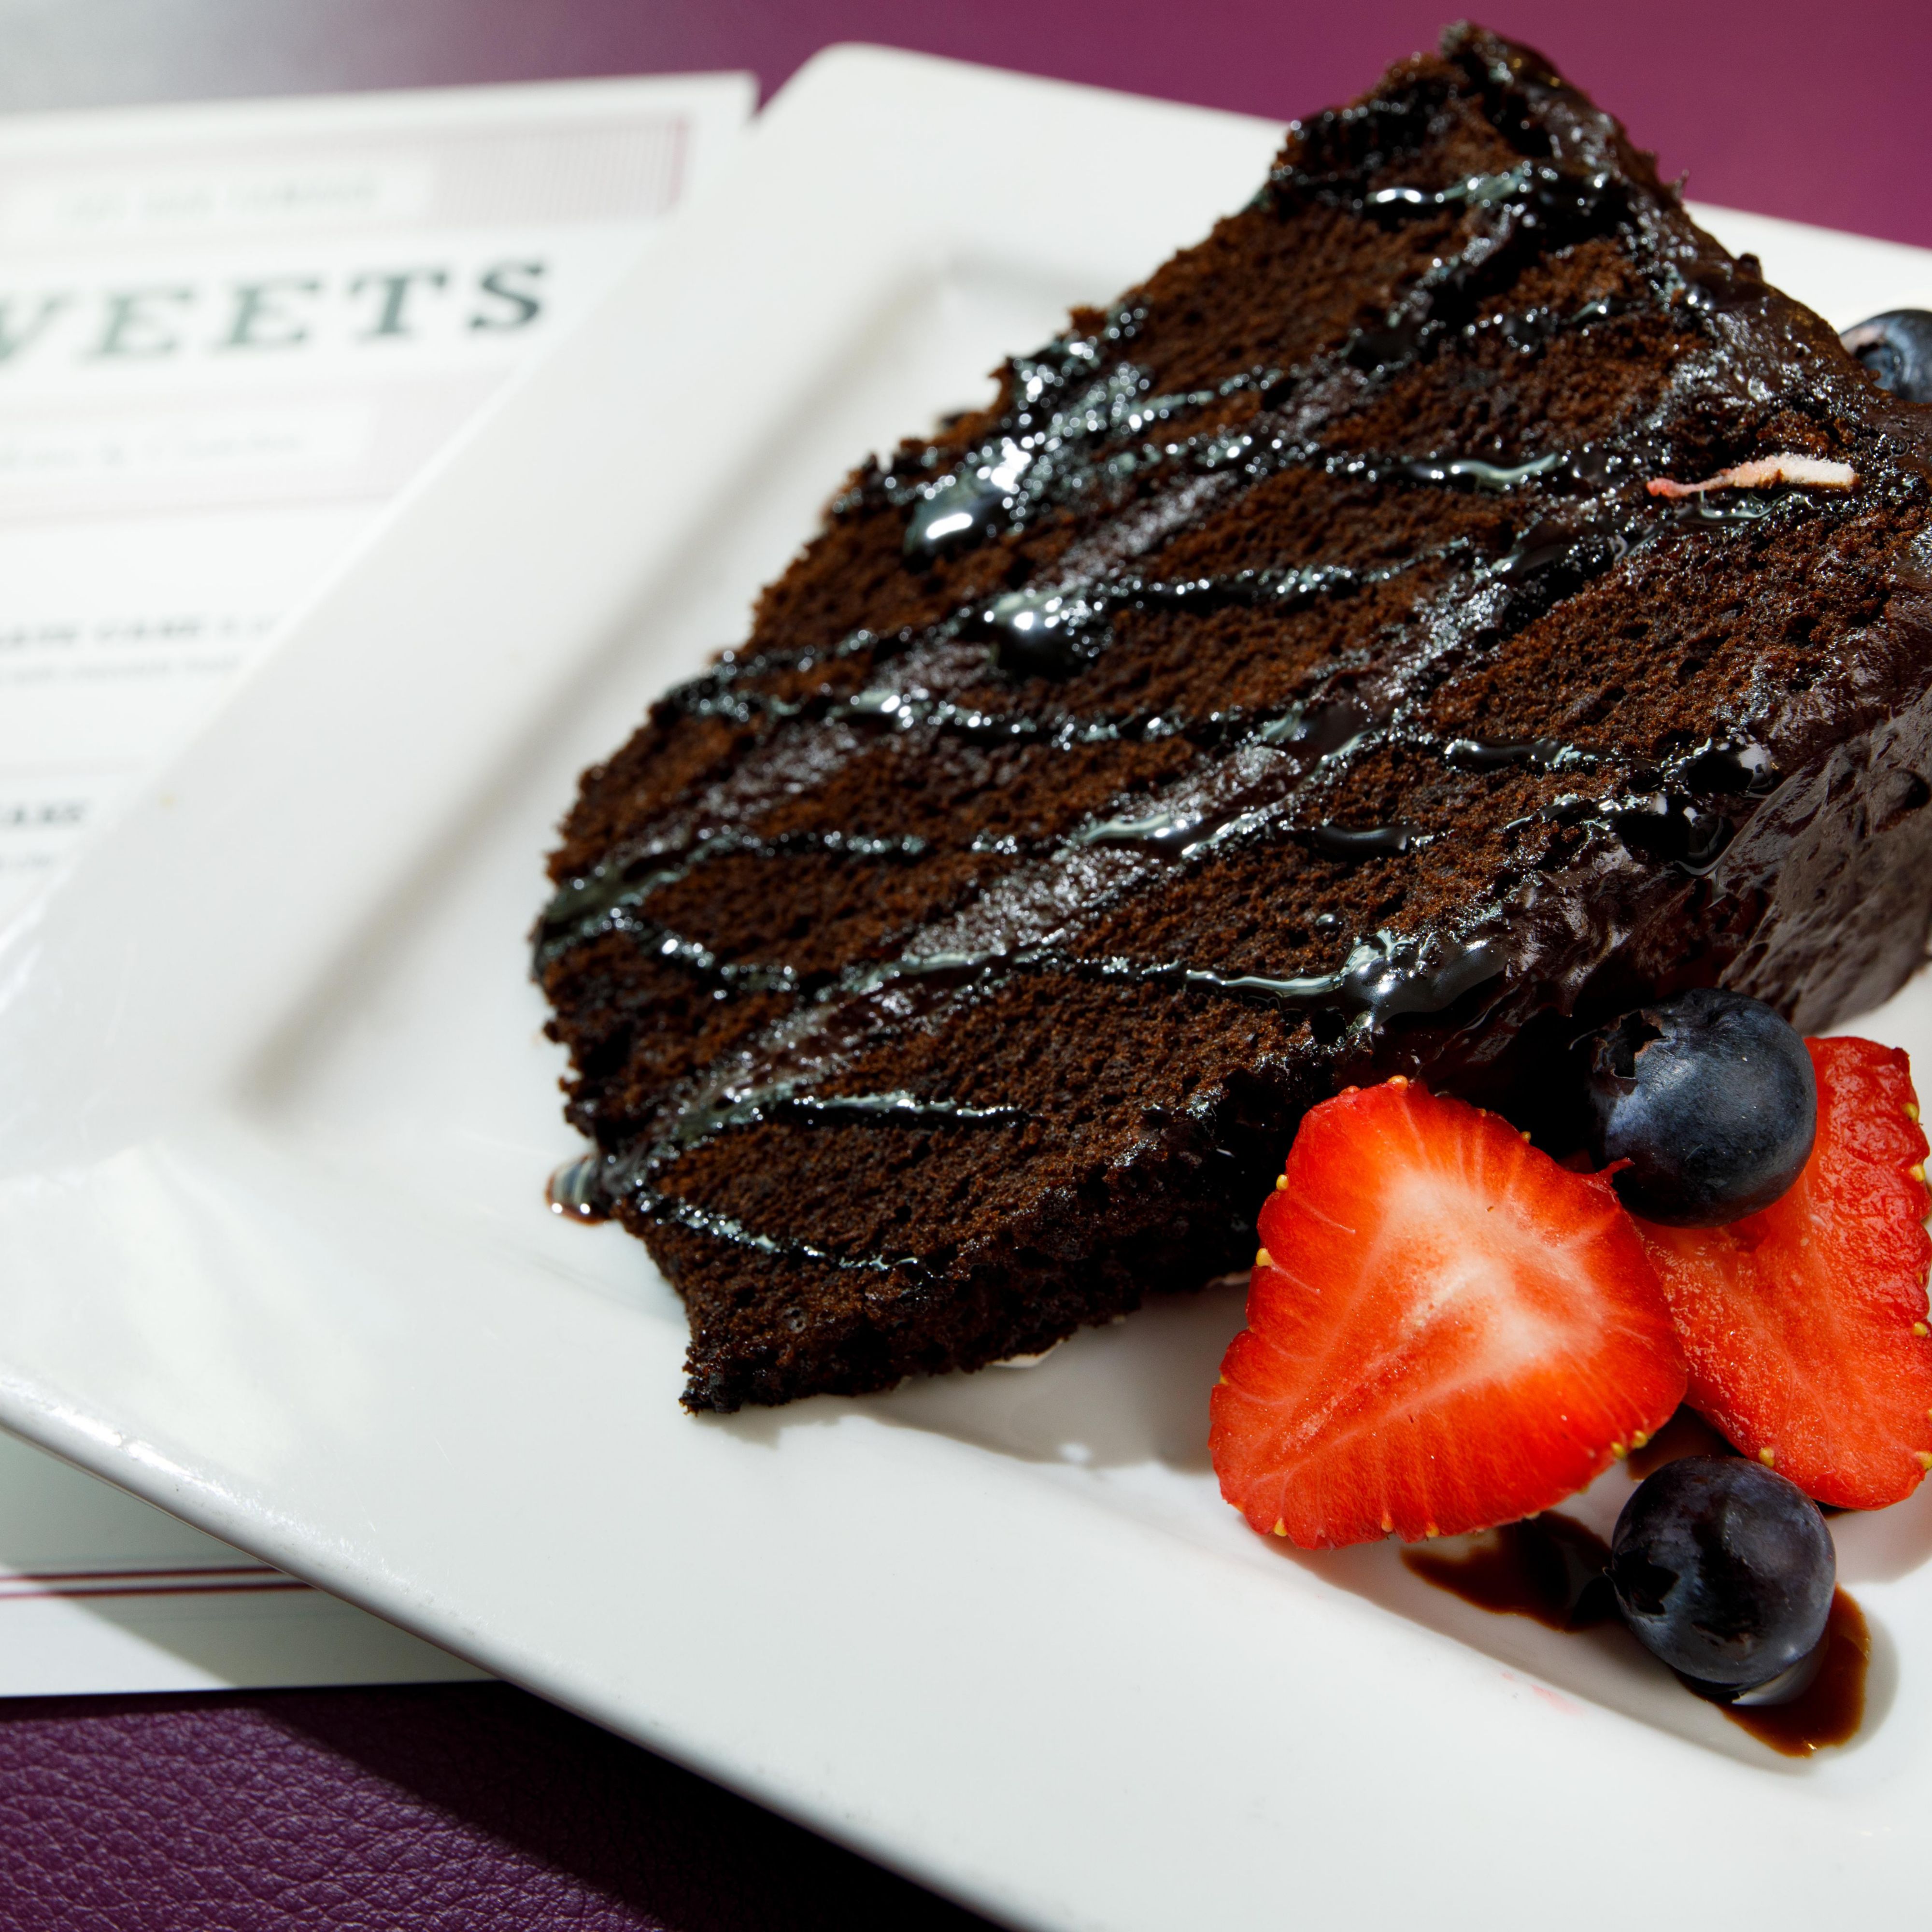 Try our delicious chocolate cake. End the night on a sweet note.